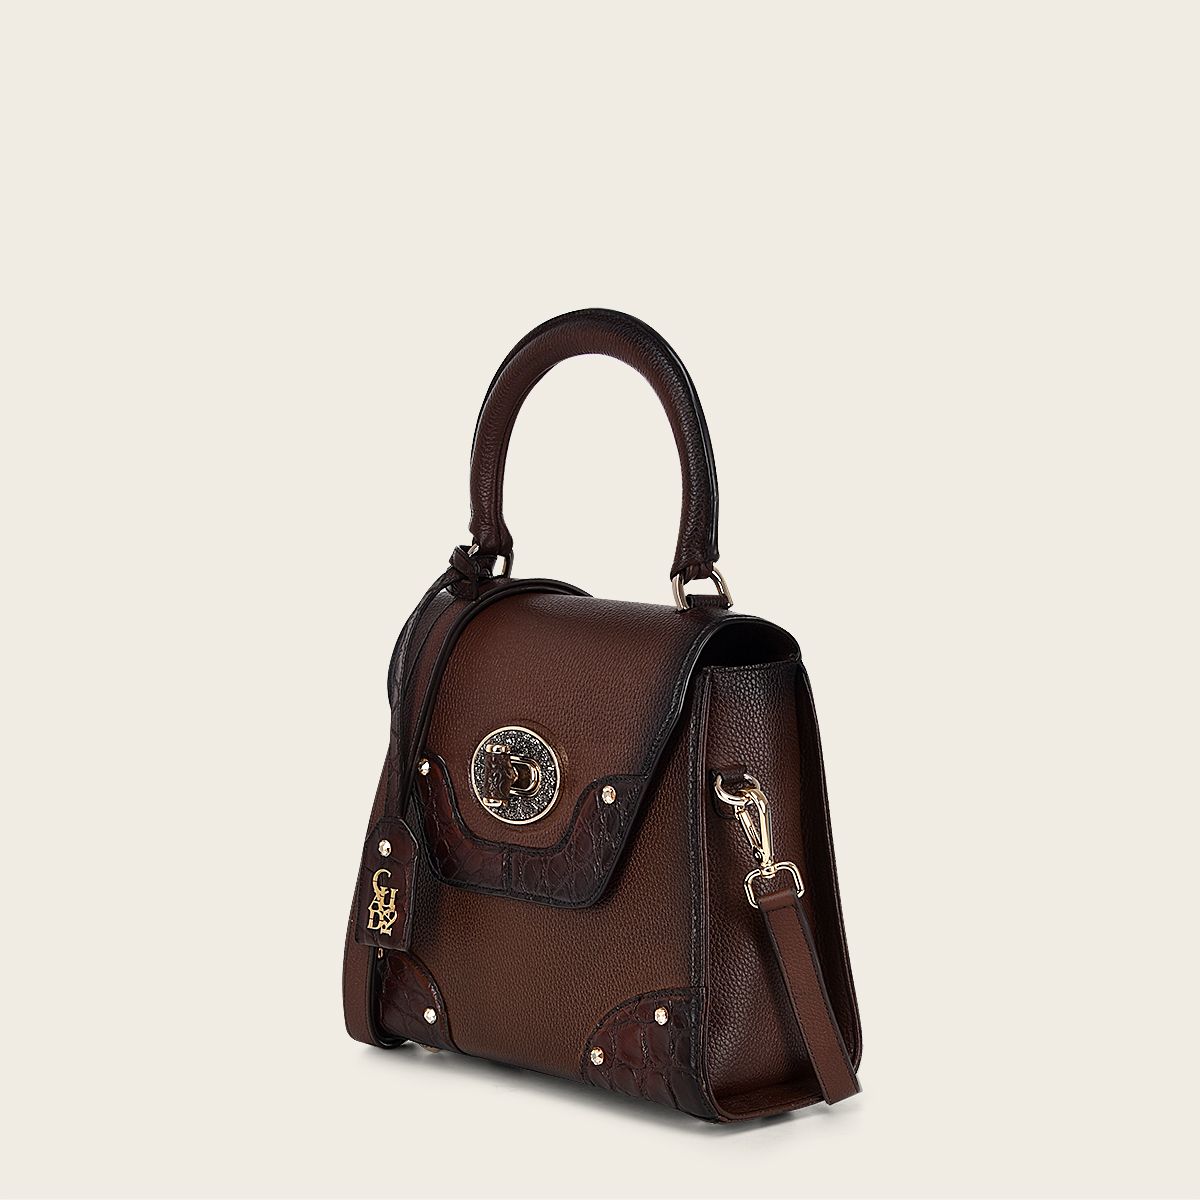 Brown handbag with high exotic leather detail